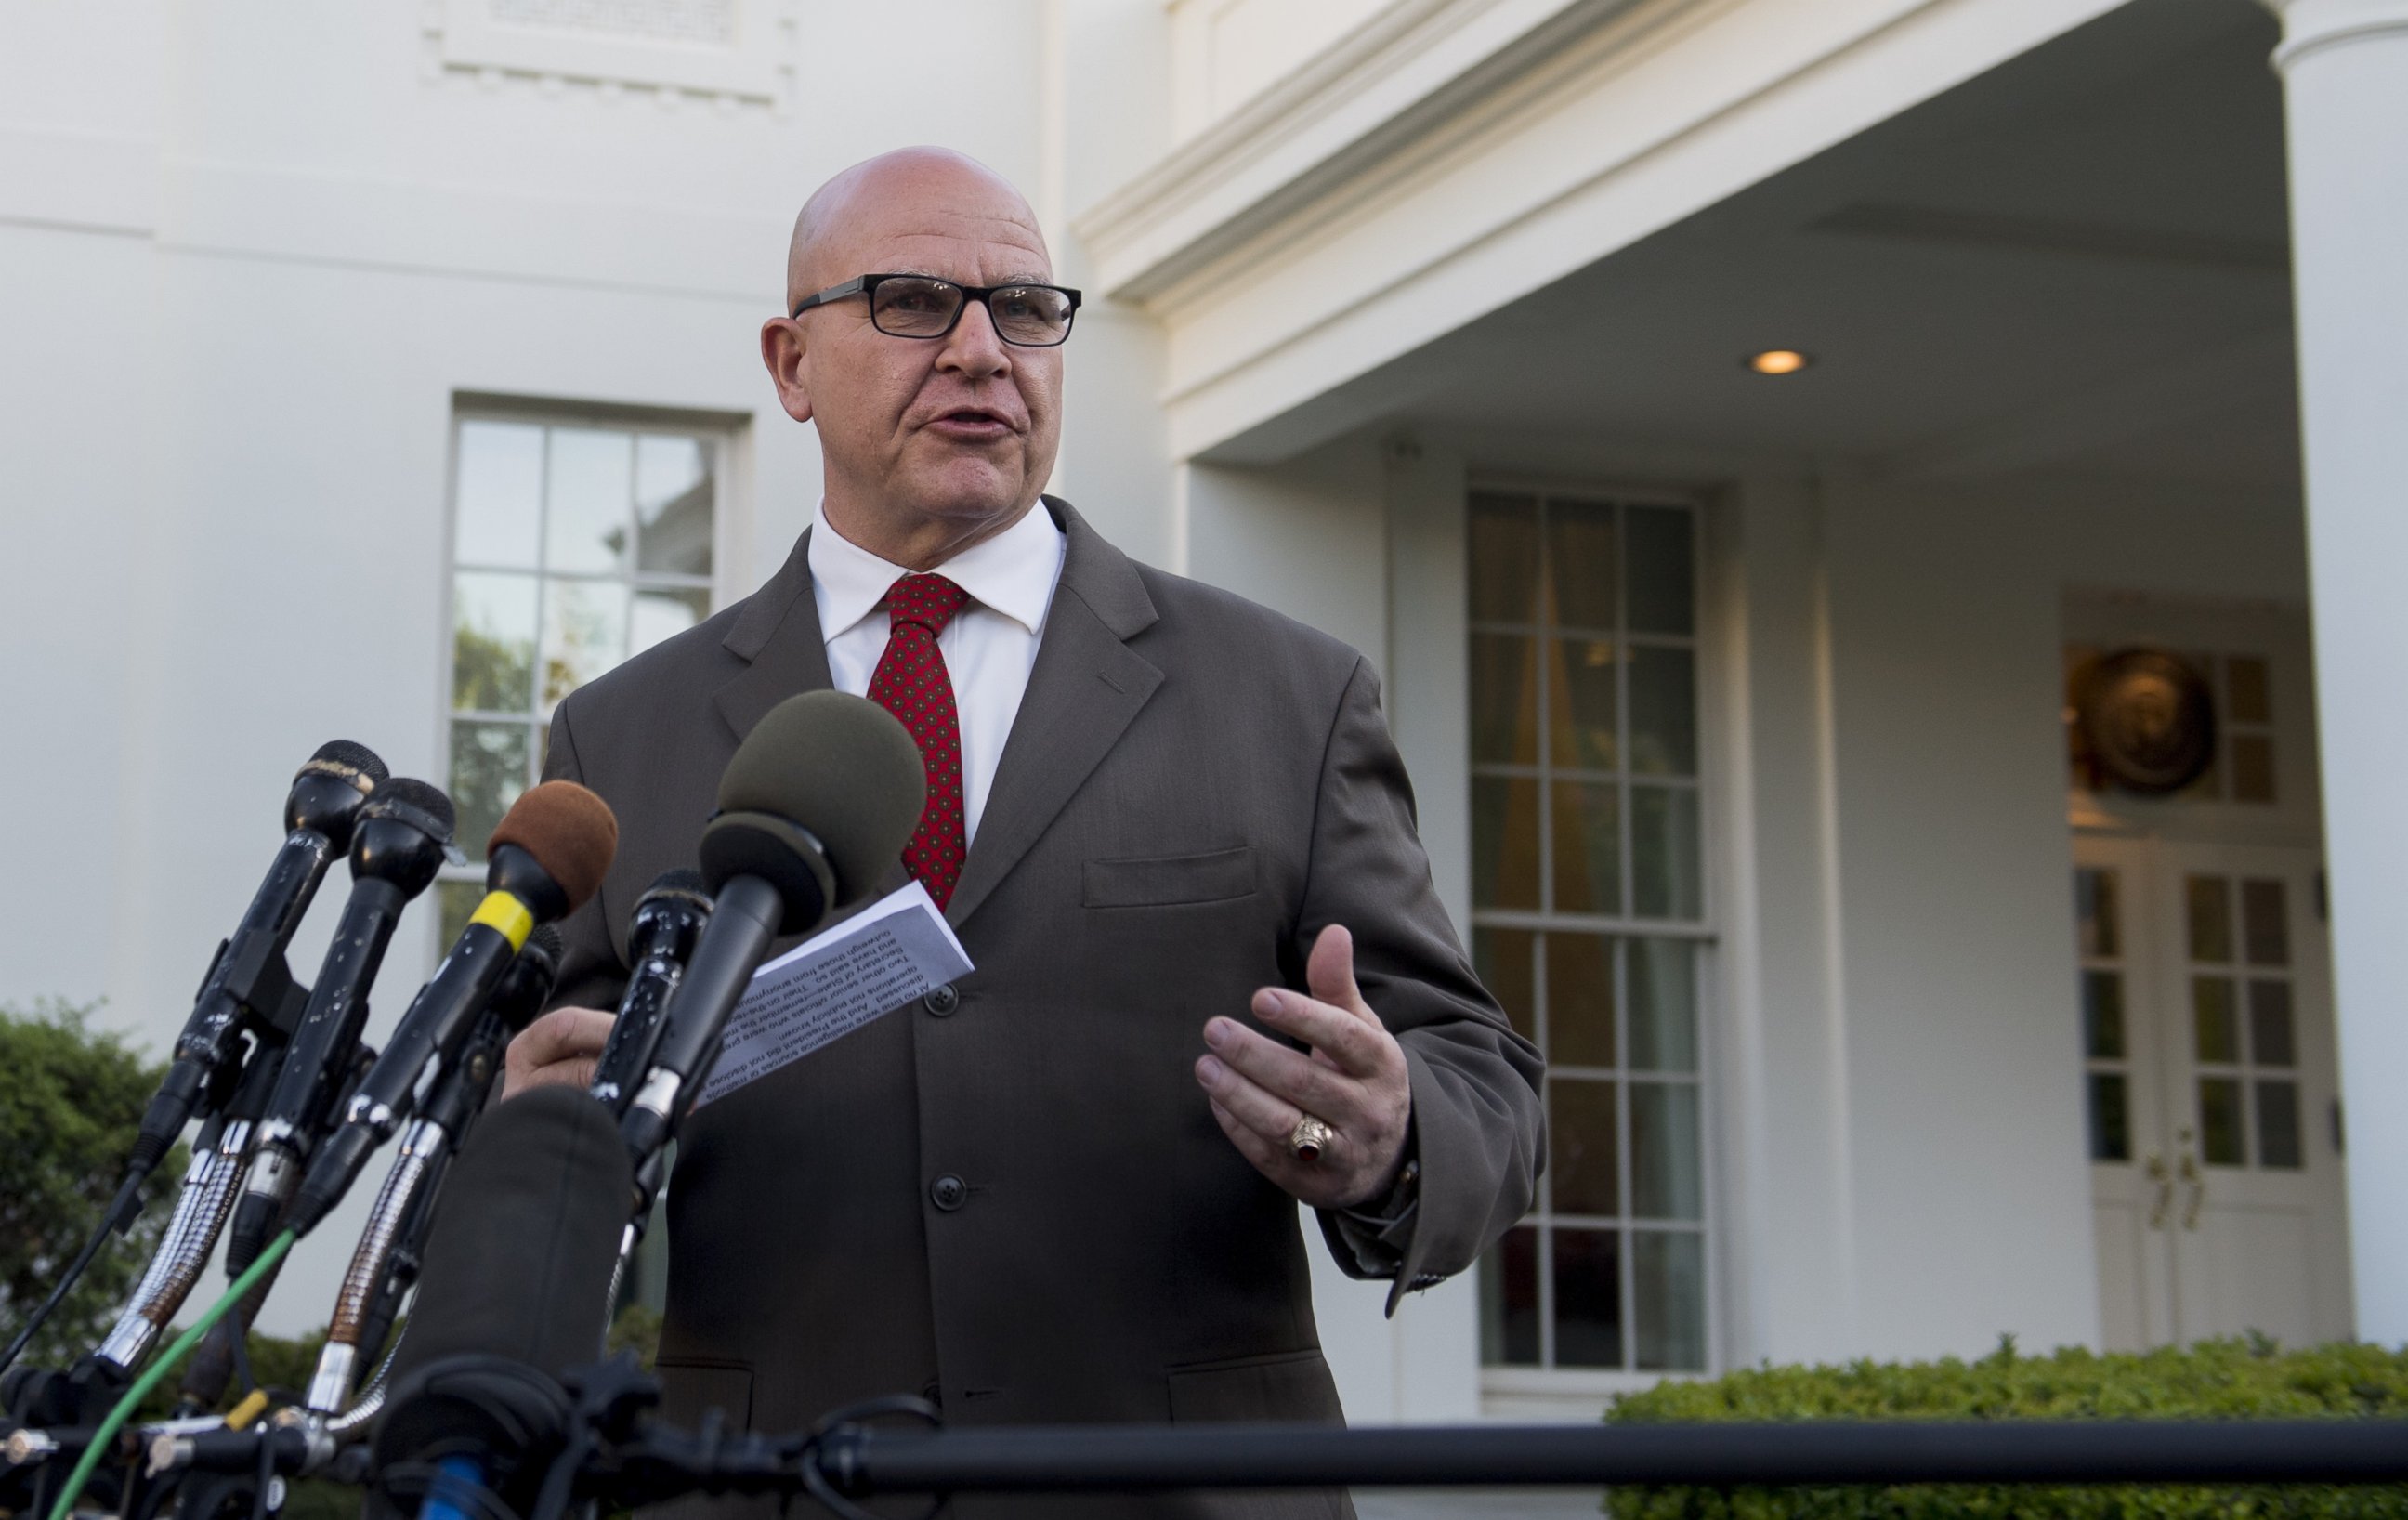 PHOTO: US National Security Advisor H. R. McMaster speaking to the press outside of the West Wing of the White House, May 15, 2017.